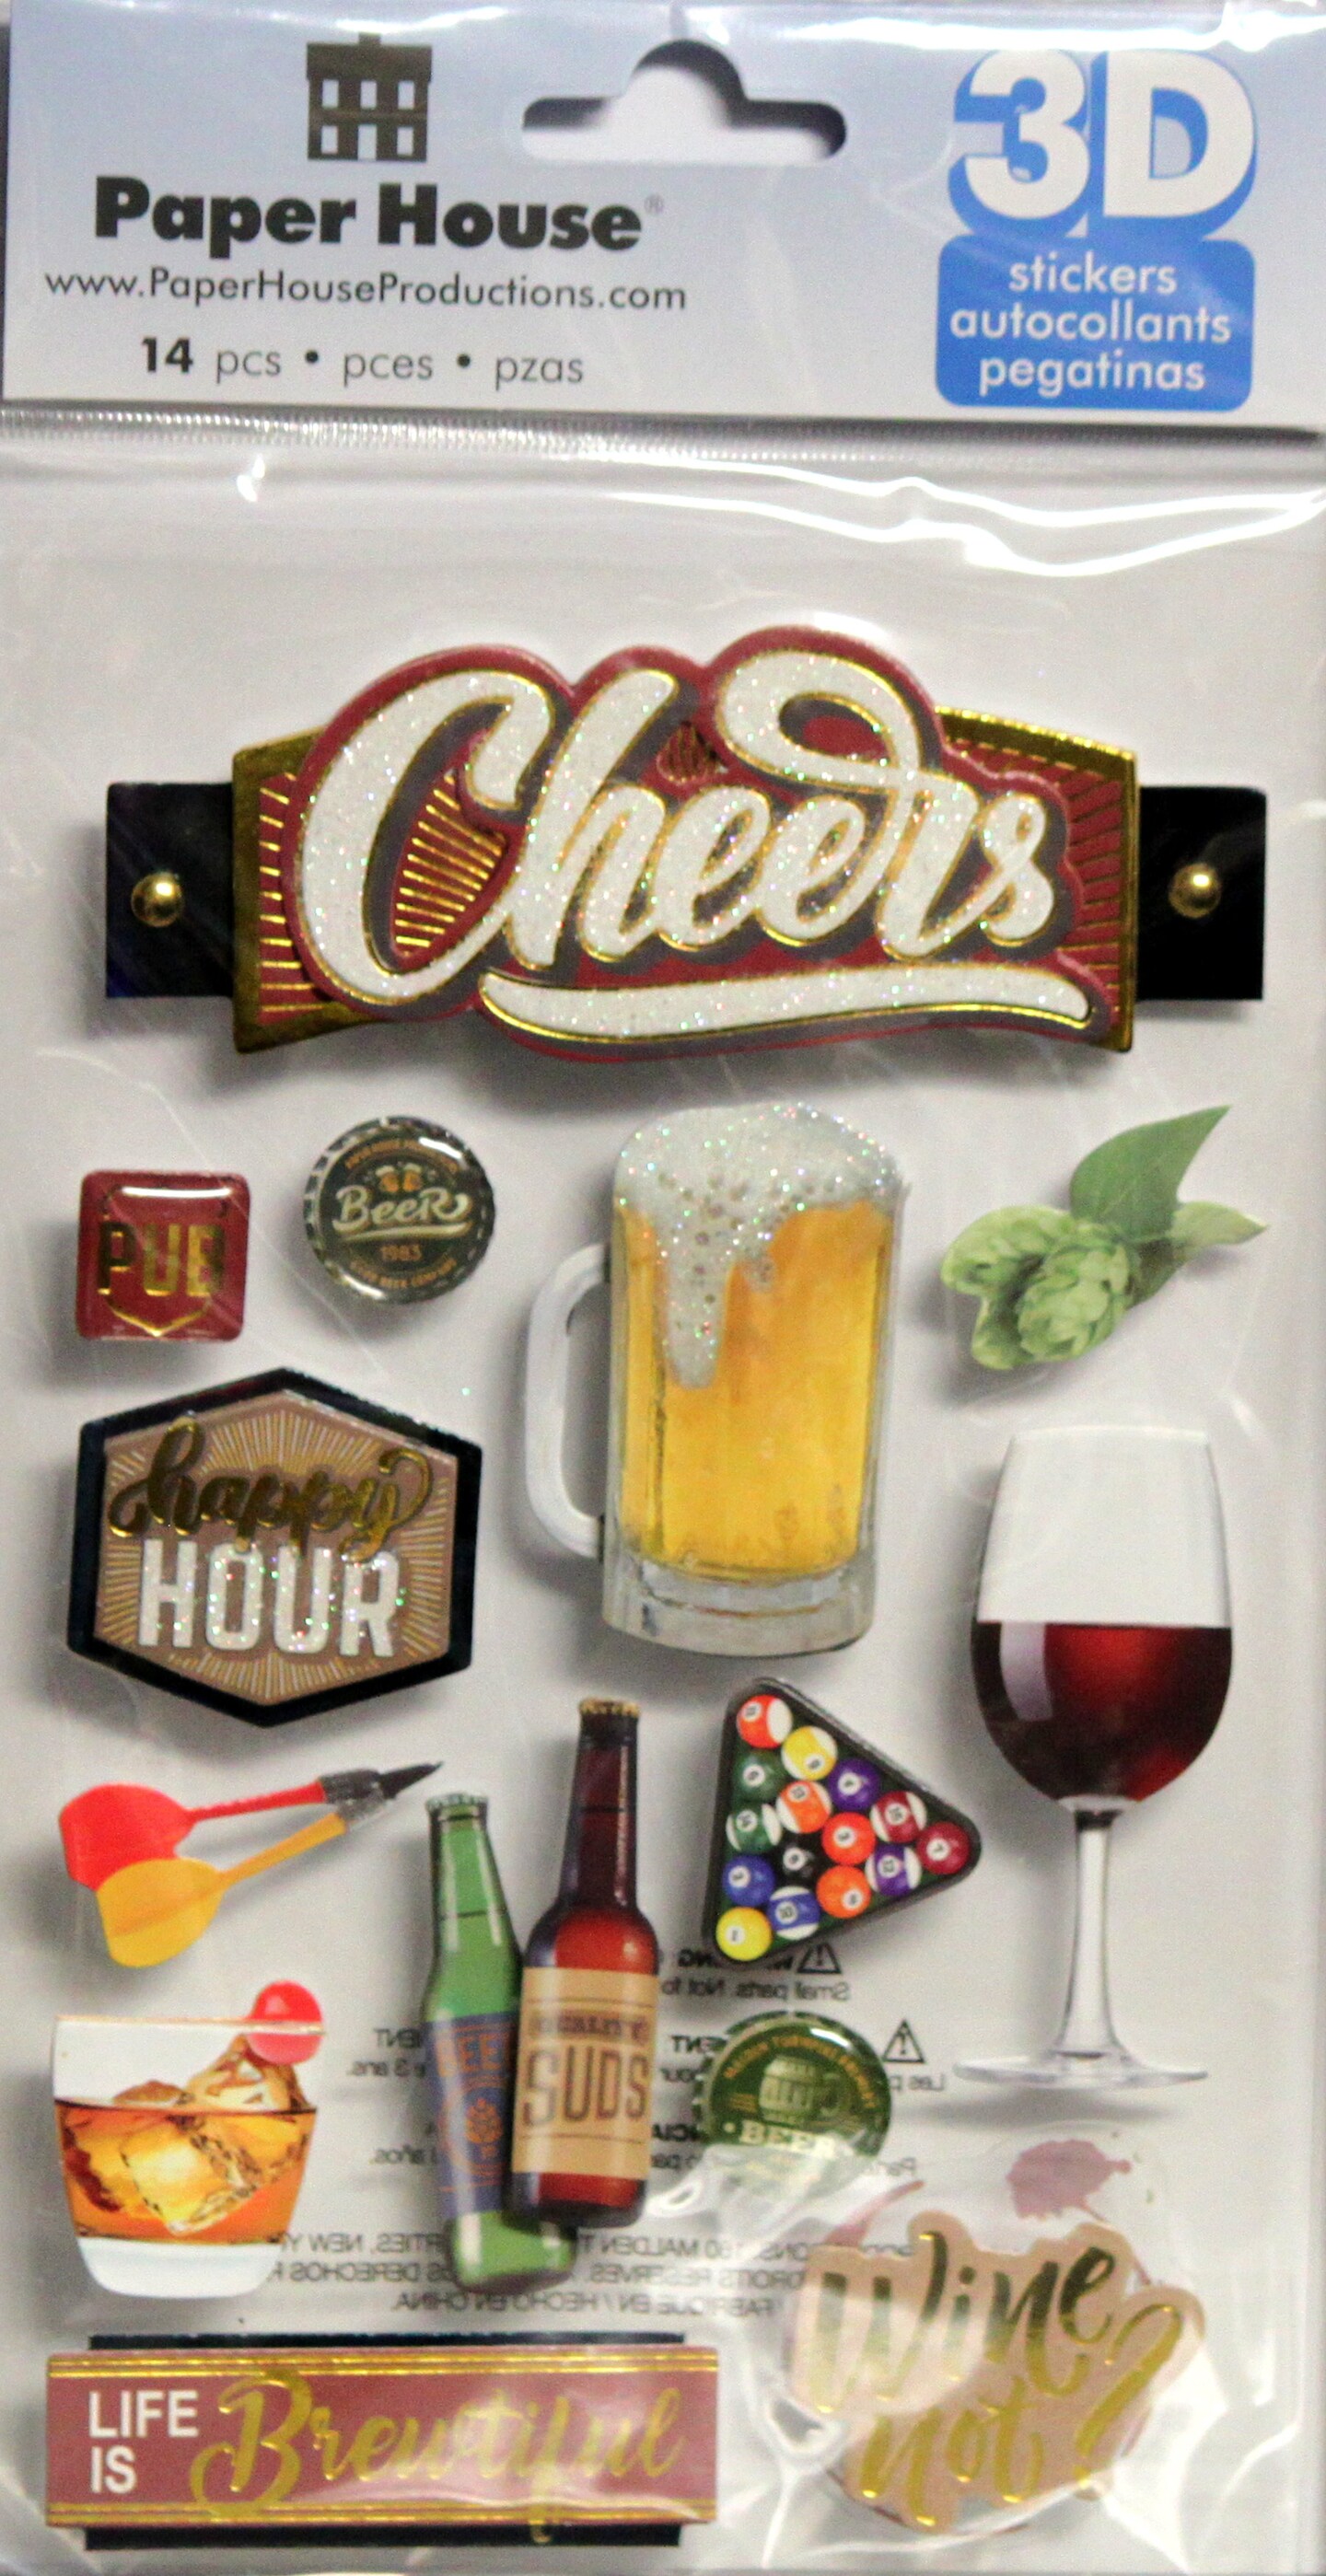 Paper House Cheers Dimensional 3D Stickers